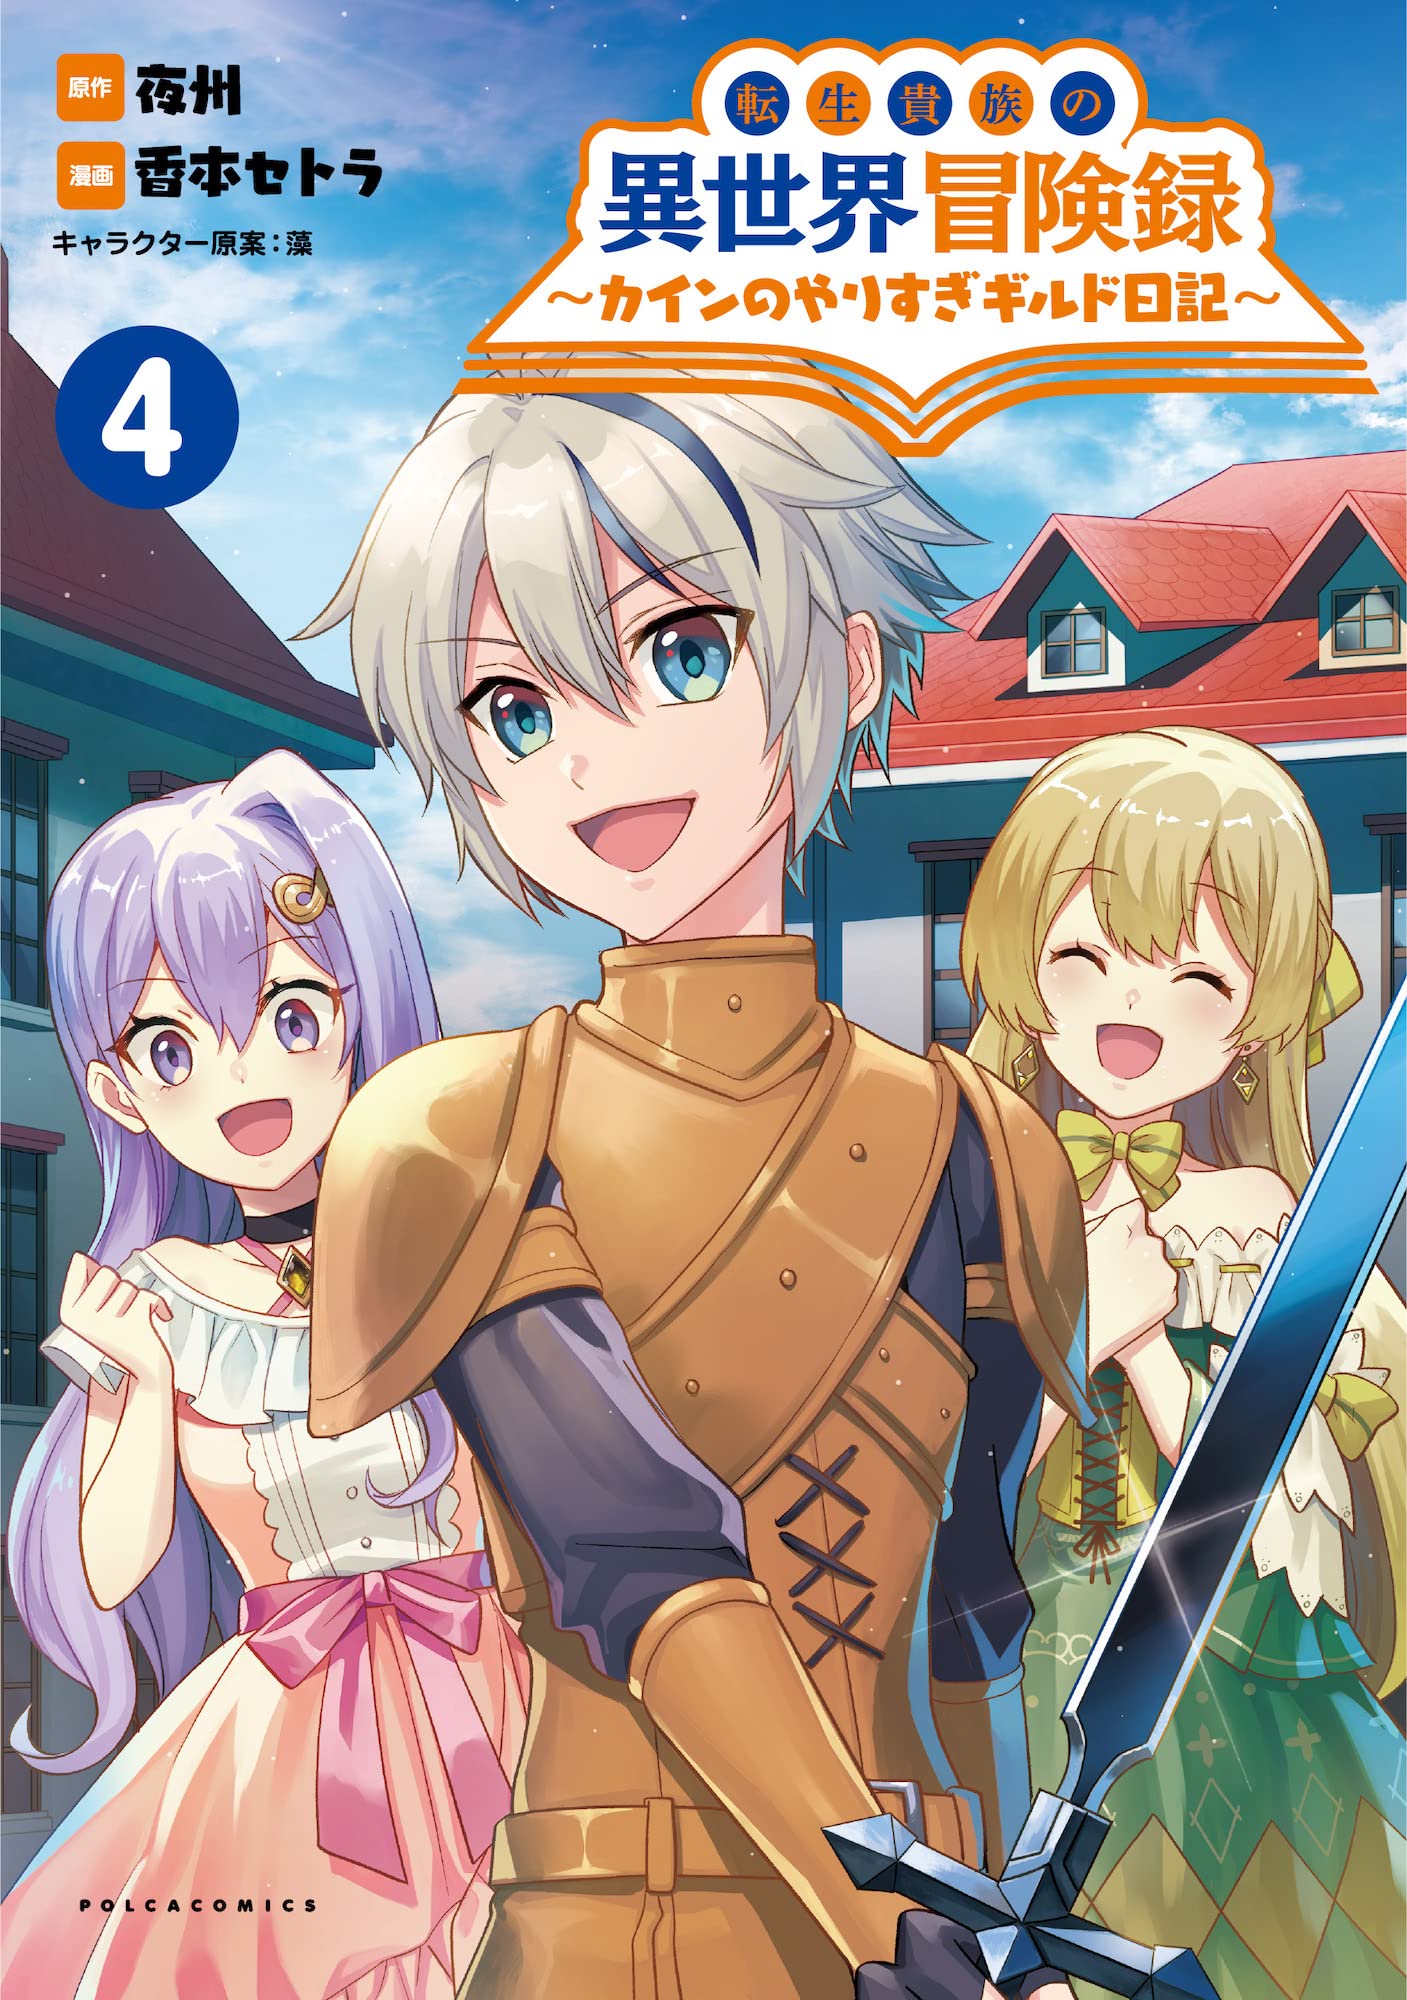 Chronicles of an Aristocrat Reborn in Another World (Manga)